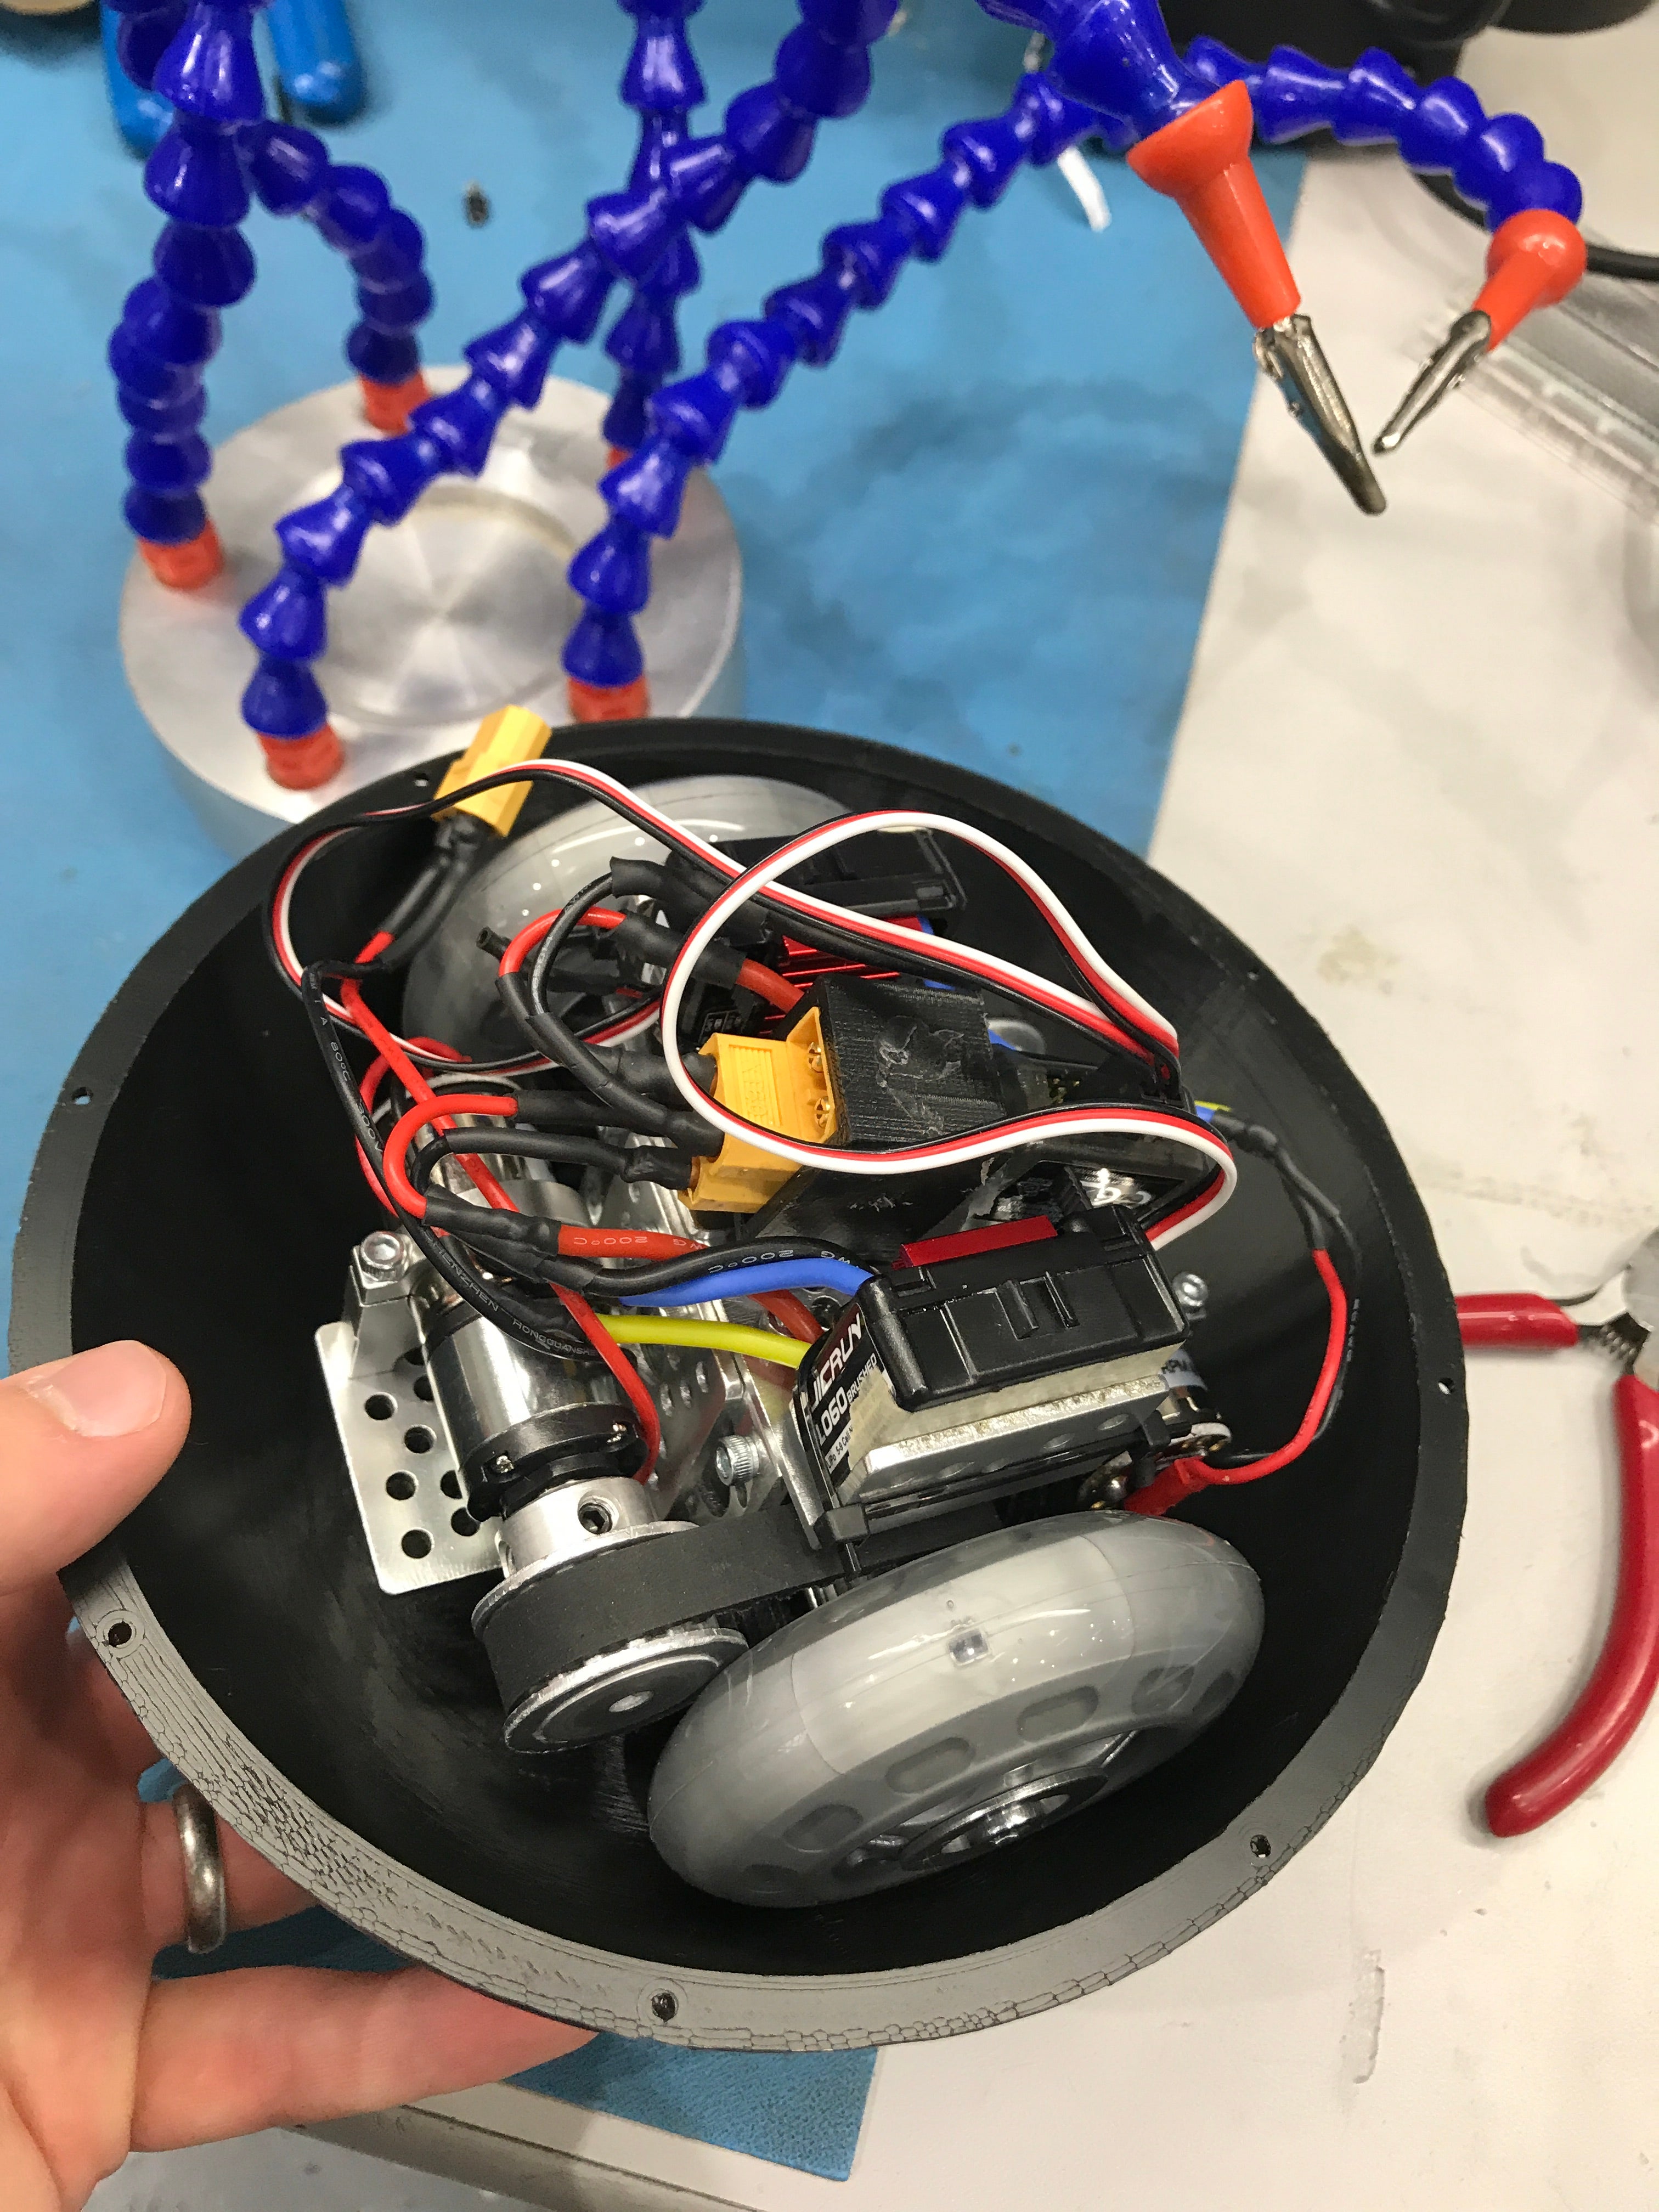 Hnds holds shell of spherical robot, filled with electronics